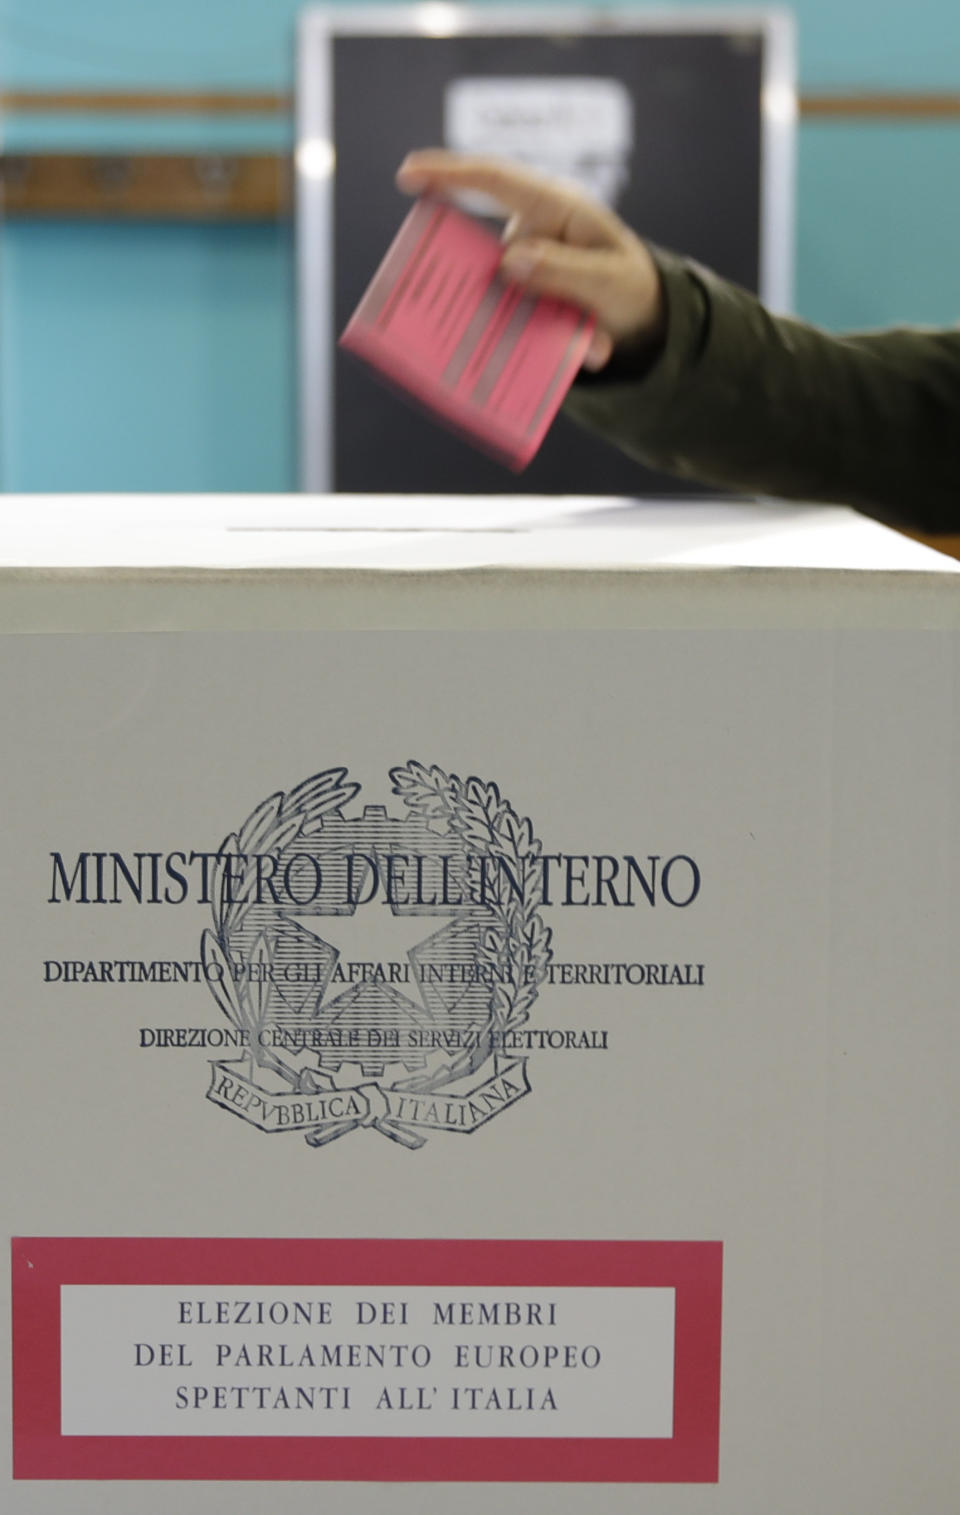 A voter casts the ballot at a polling station in Rome, Sunday, May 26, 2019. Pivotal elections for the European Union parliament reach their climax Sunday as the last 21 nations go to the polls and results are announced in a vote that boils down to a continent-wide battle between euroskeptic populists and proponents of closer EU unity. (AP Photo/Alessandra Tarantino)